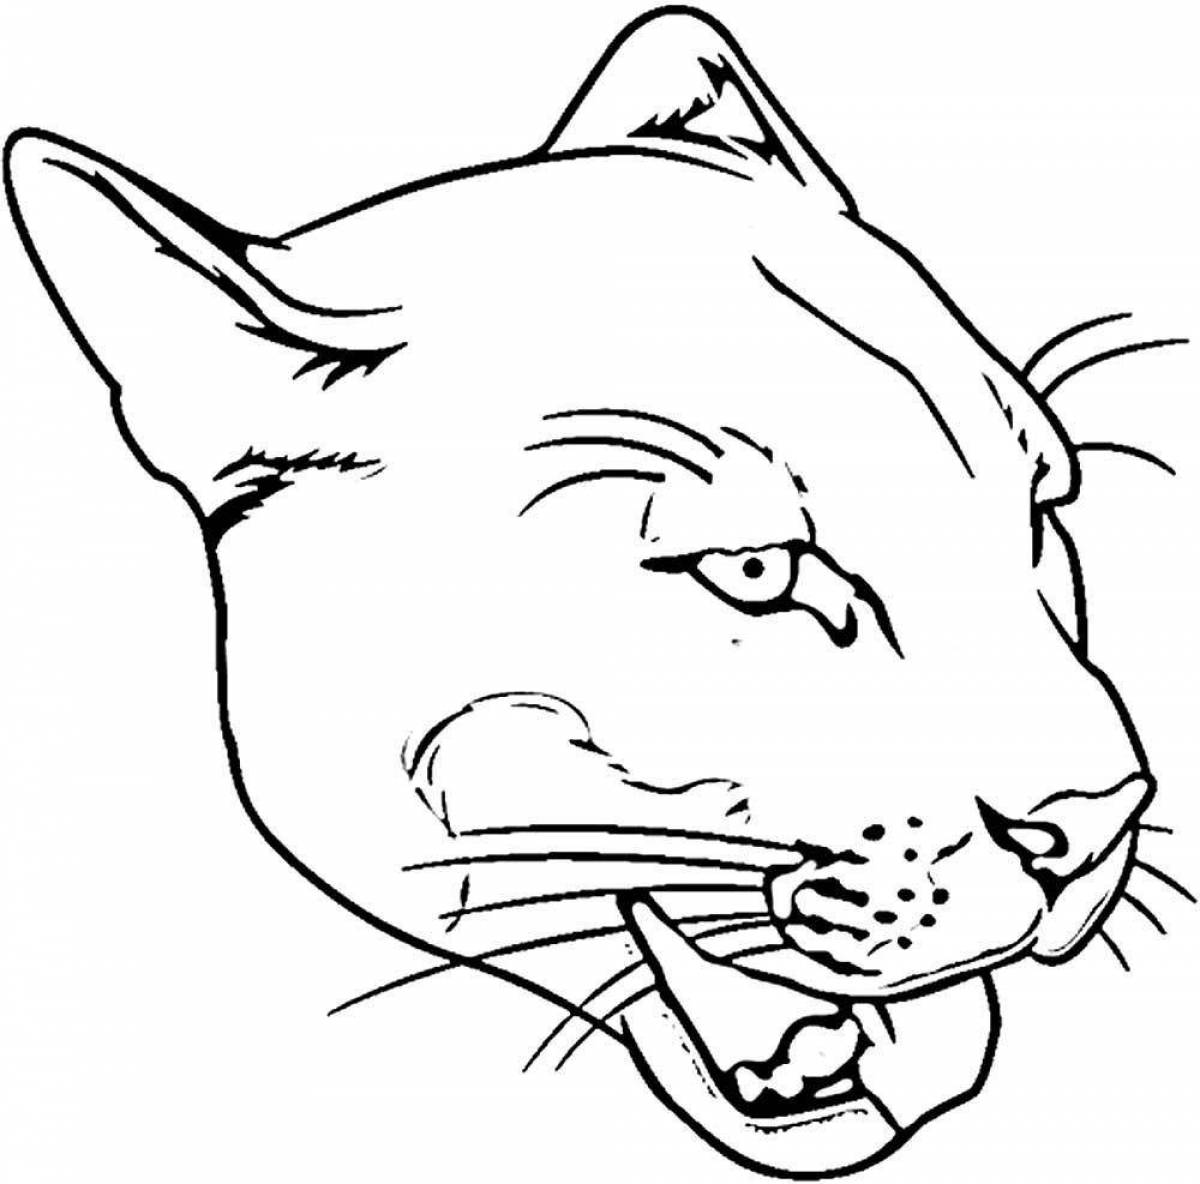 Amazing puma coloring page for kids